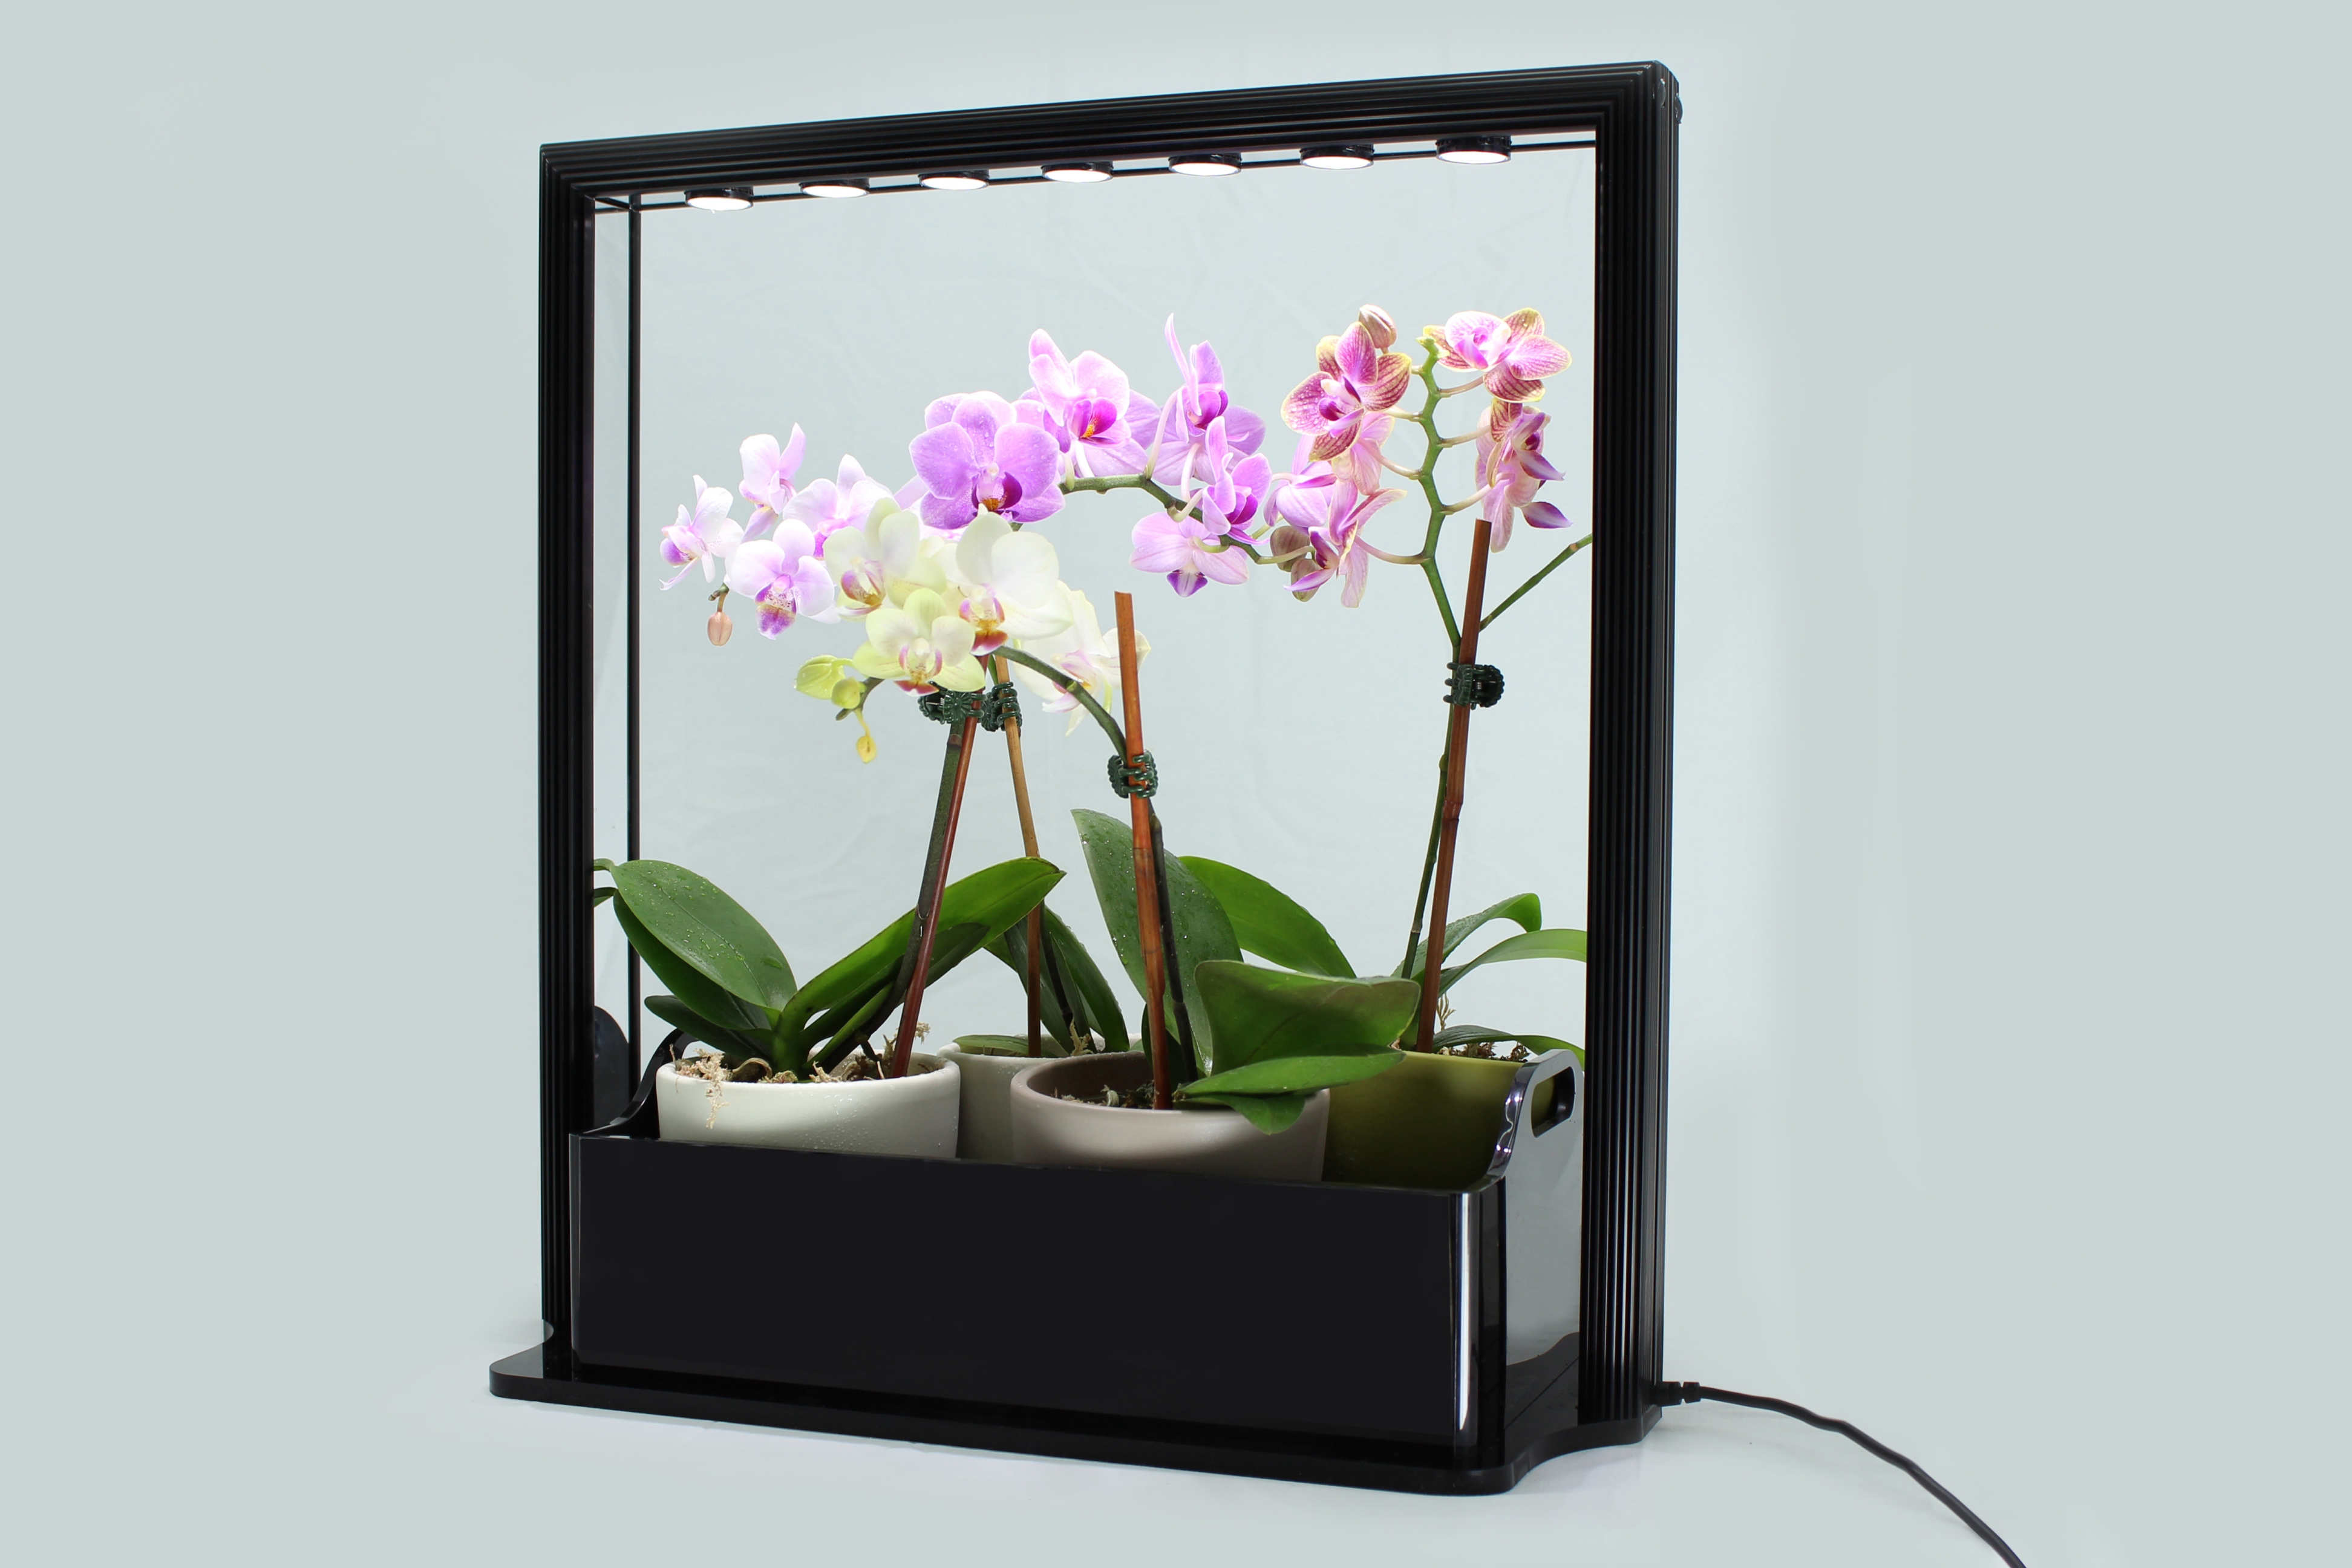 New LED Mini Garden from InHomeGardening.com is a Great ...